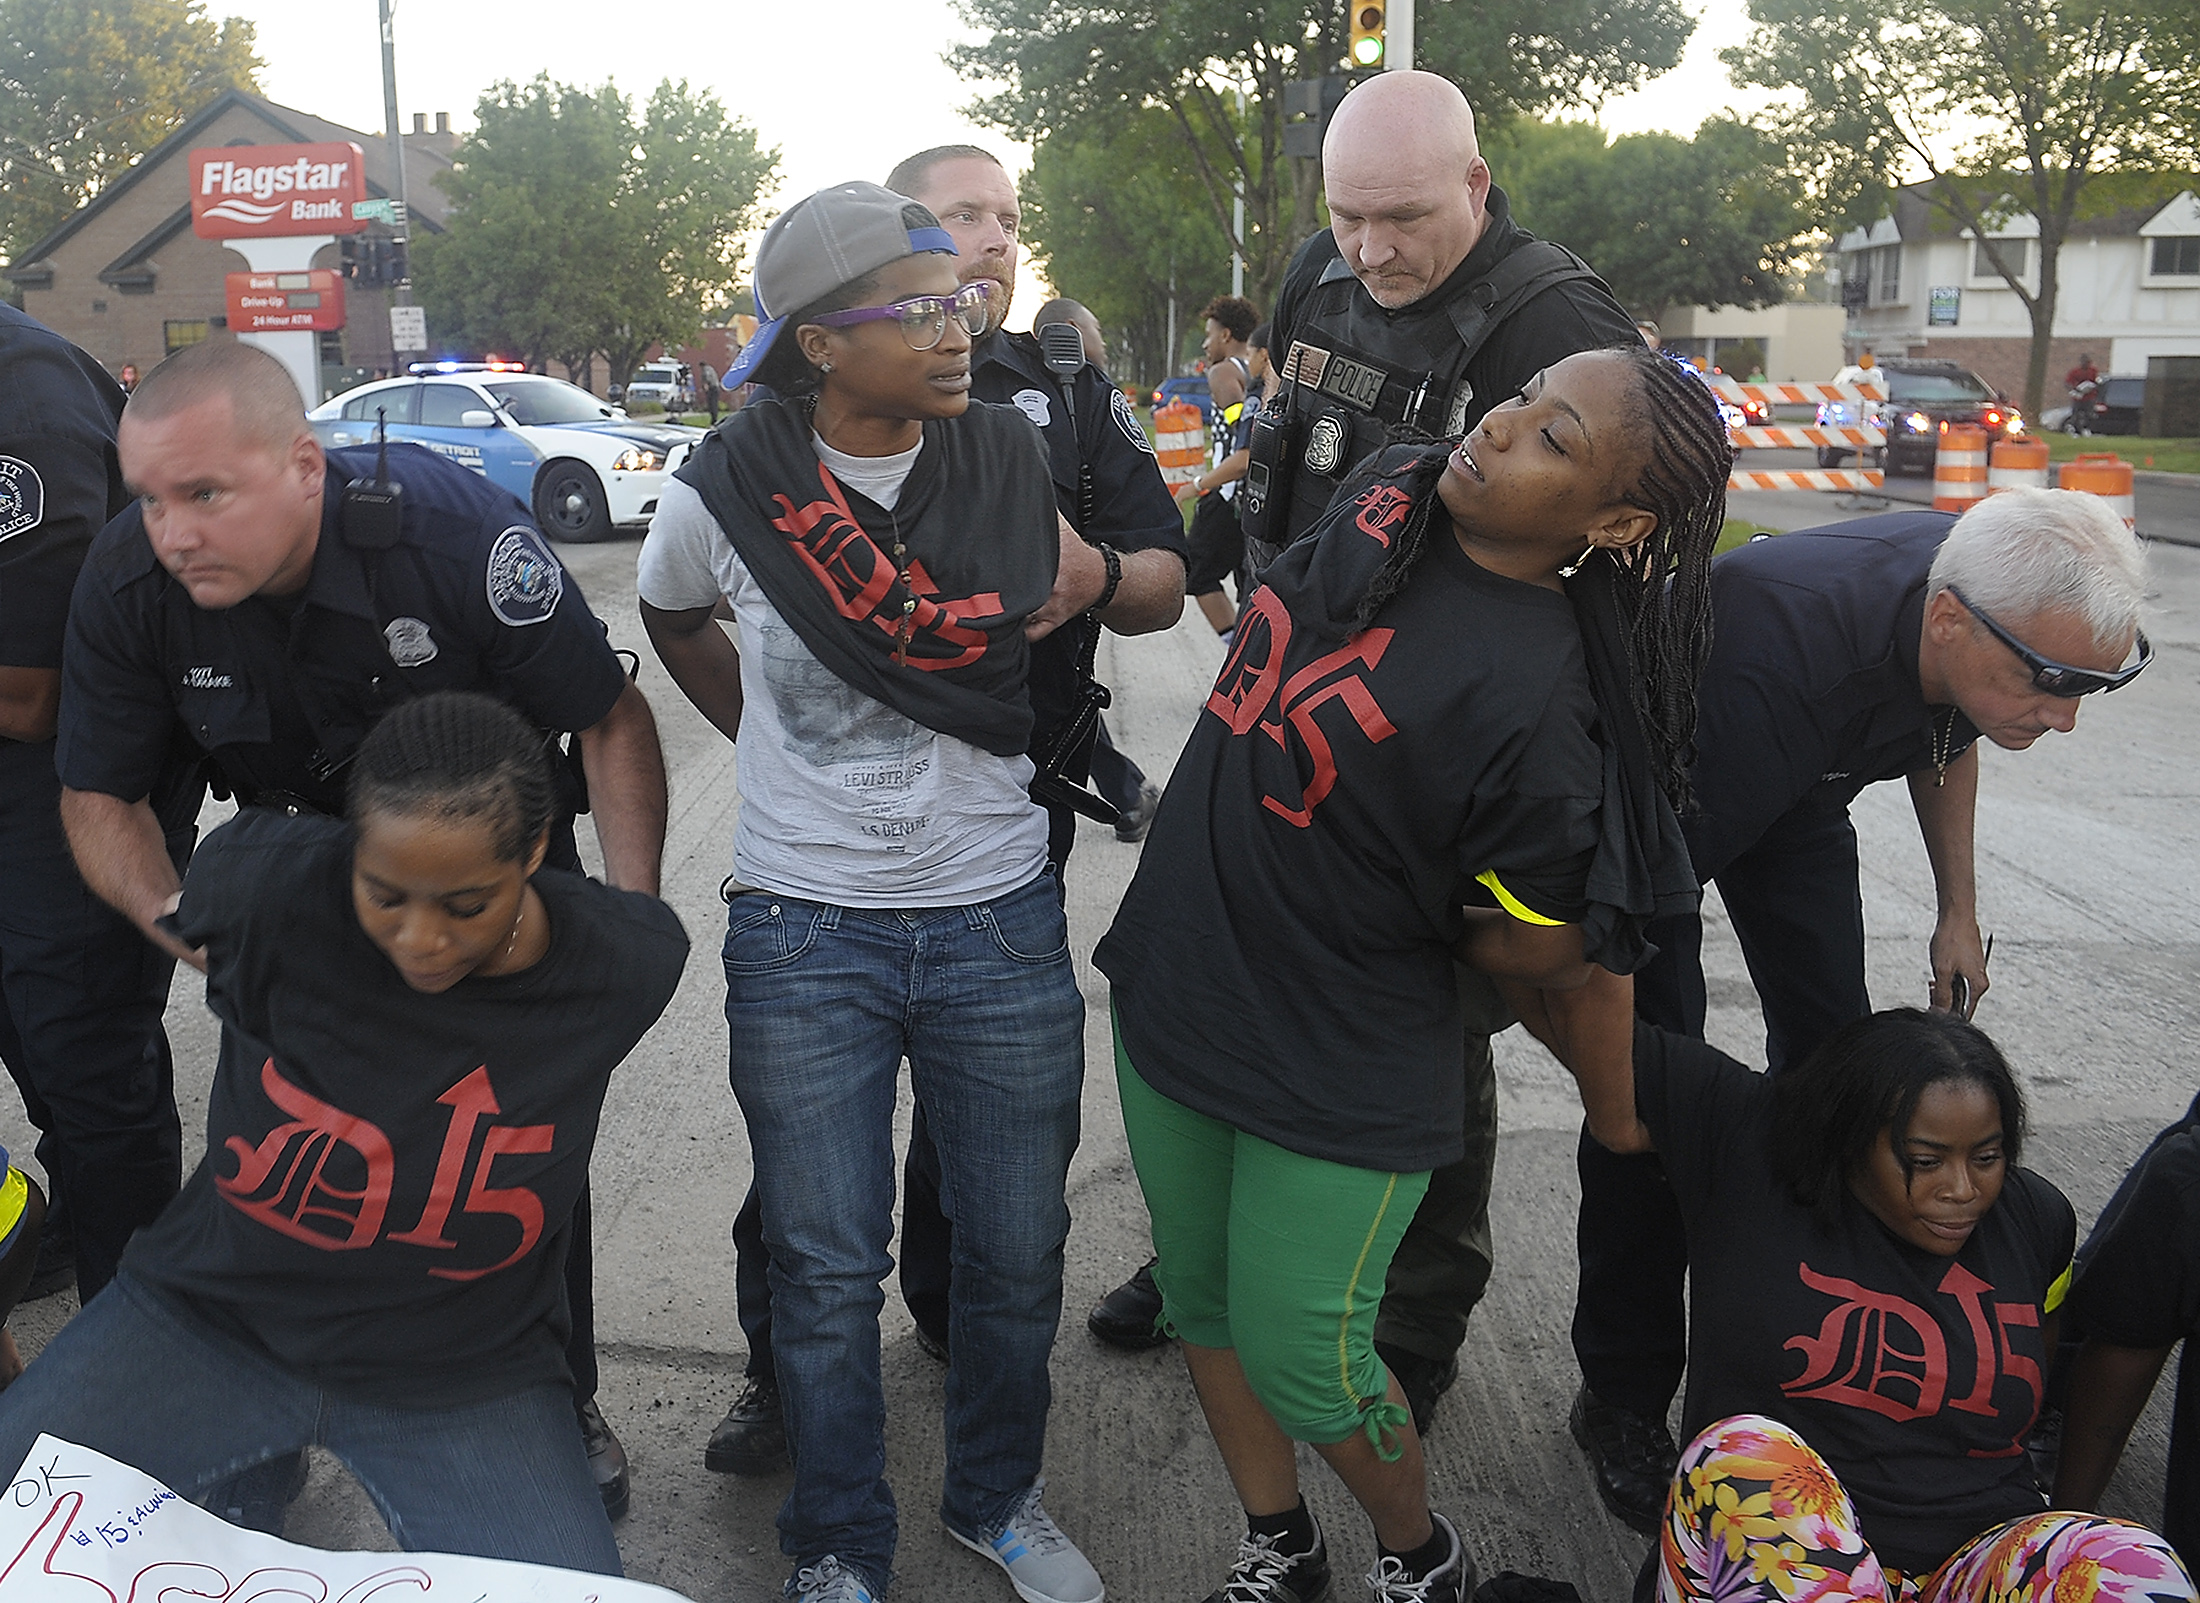 Dozens of people were arrested during a minimum wage protest outside a Detroit McDonald's. (Credit: Darci E. McConnell/D15 campaign)